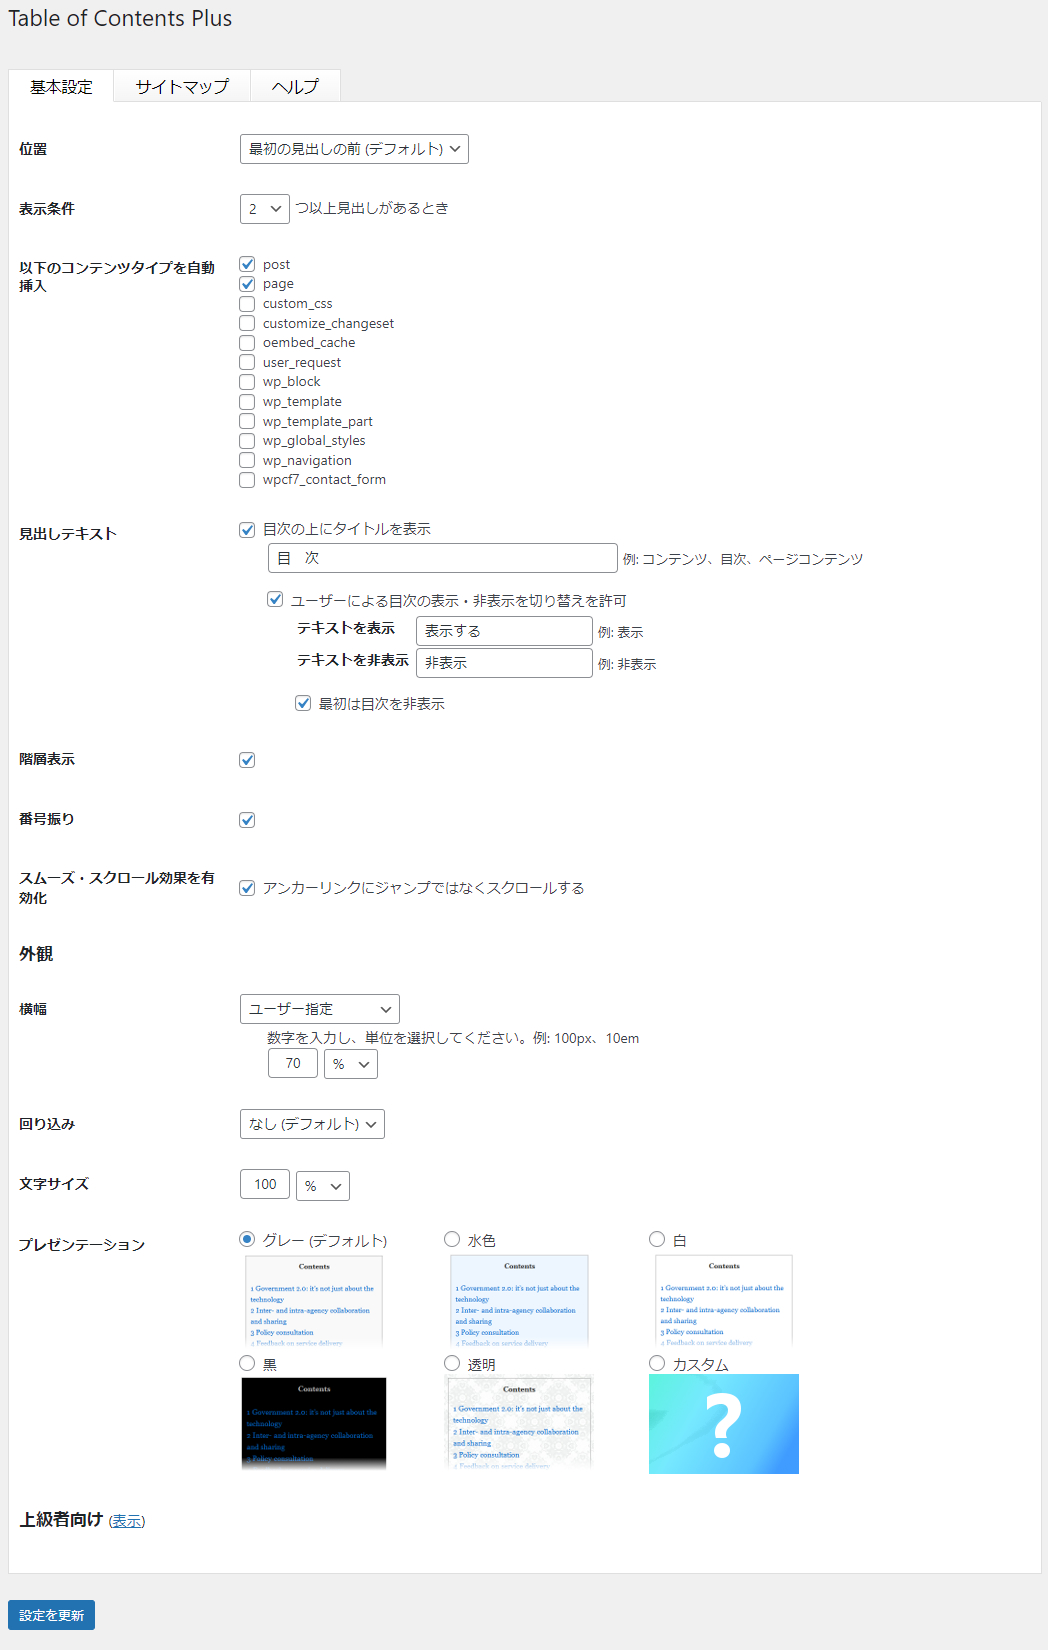 Table of Contents Plusの設定画面